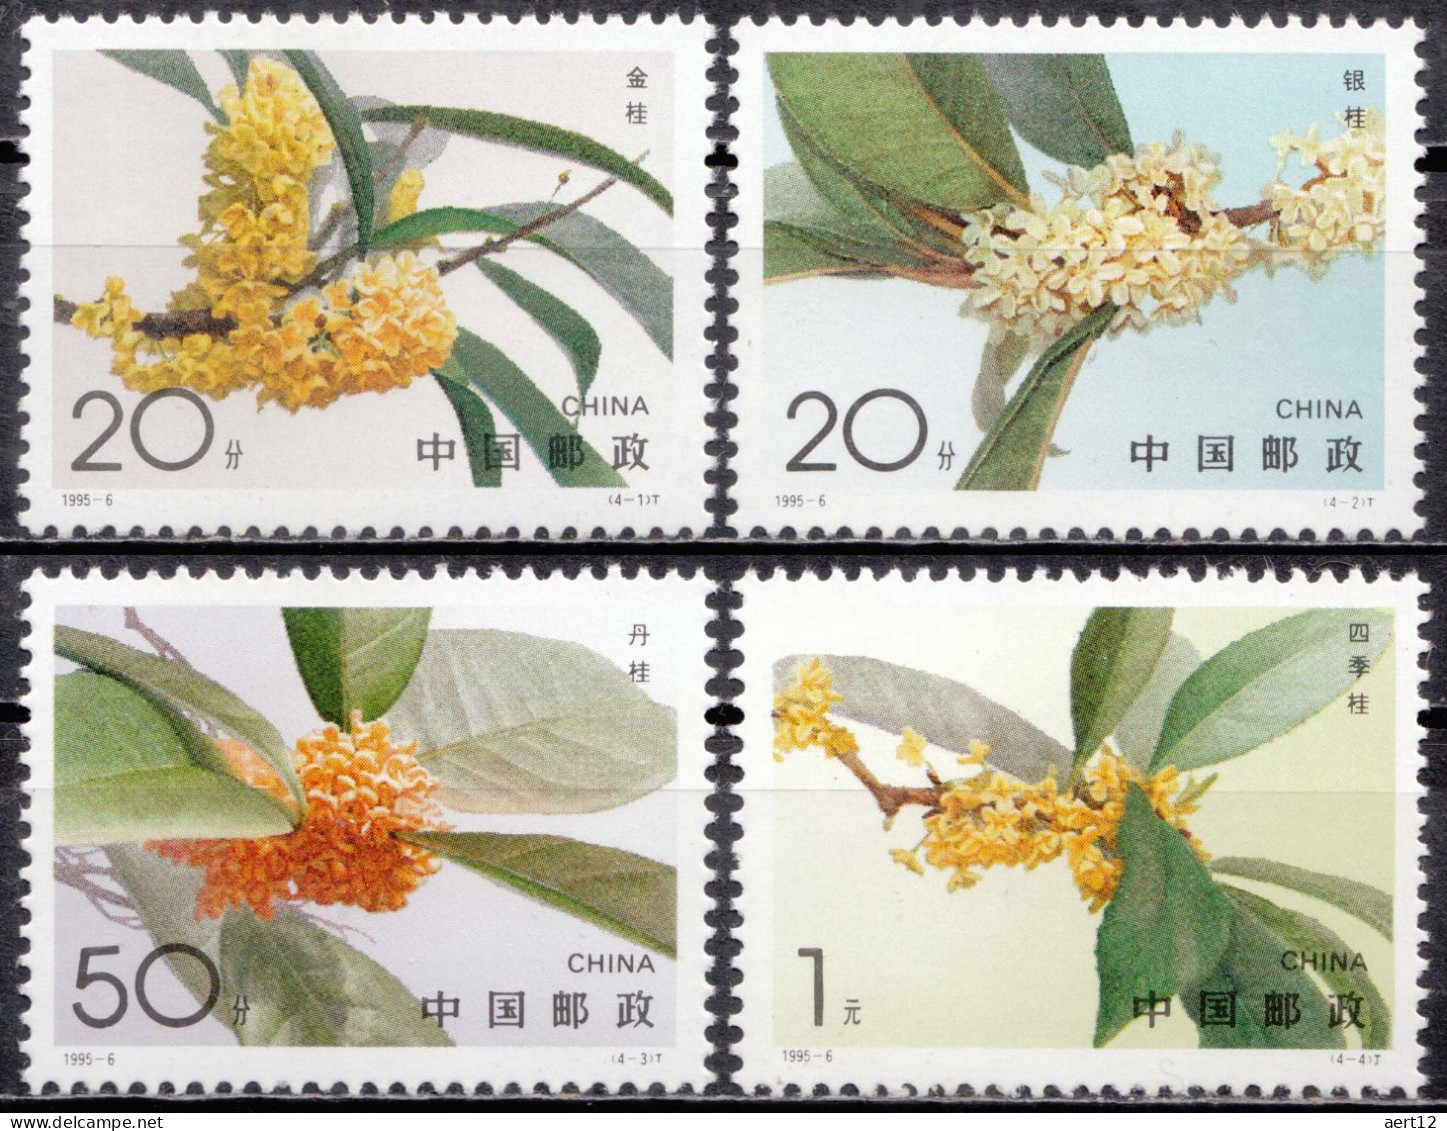 1995, China, People's Republic, Sweet Osmanthus, Flowers, Leaves, Plants, 4 Stamps, MNH(**), CN 2600-03 - Ongebruikt